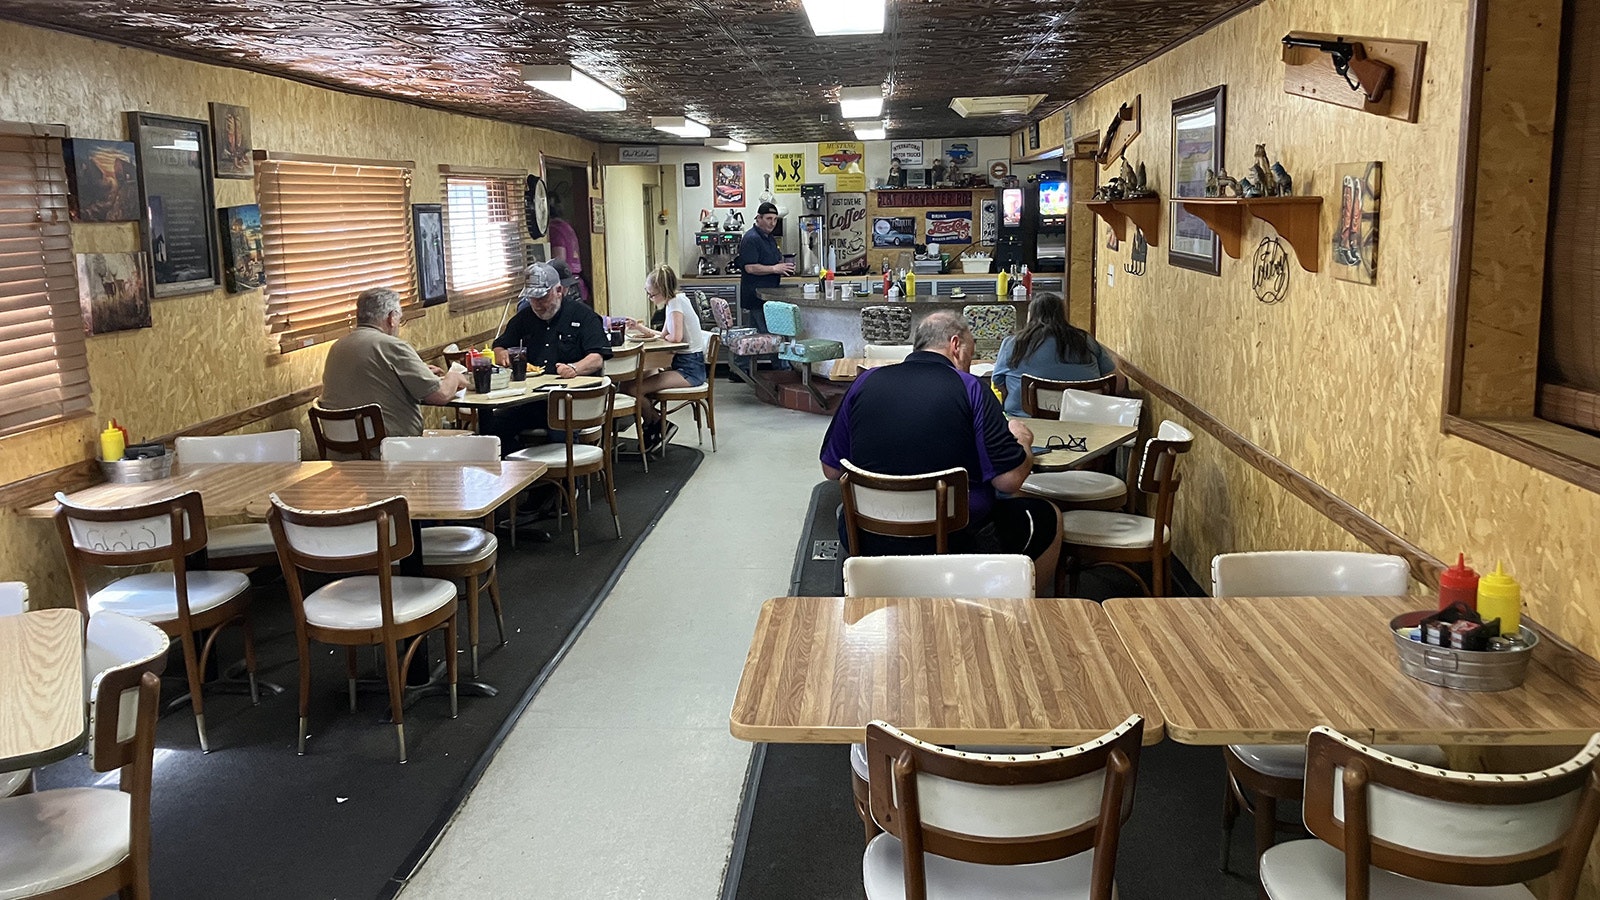 G-Ma’s Diner’s interior features an old-style metal ceiling and Western and classic diner images on its walls.